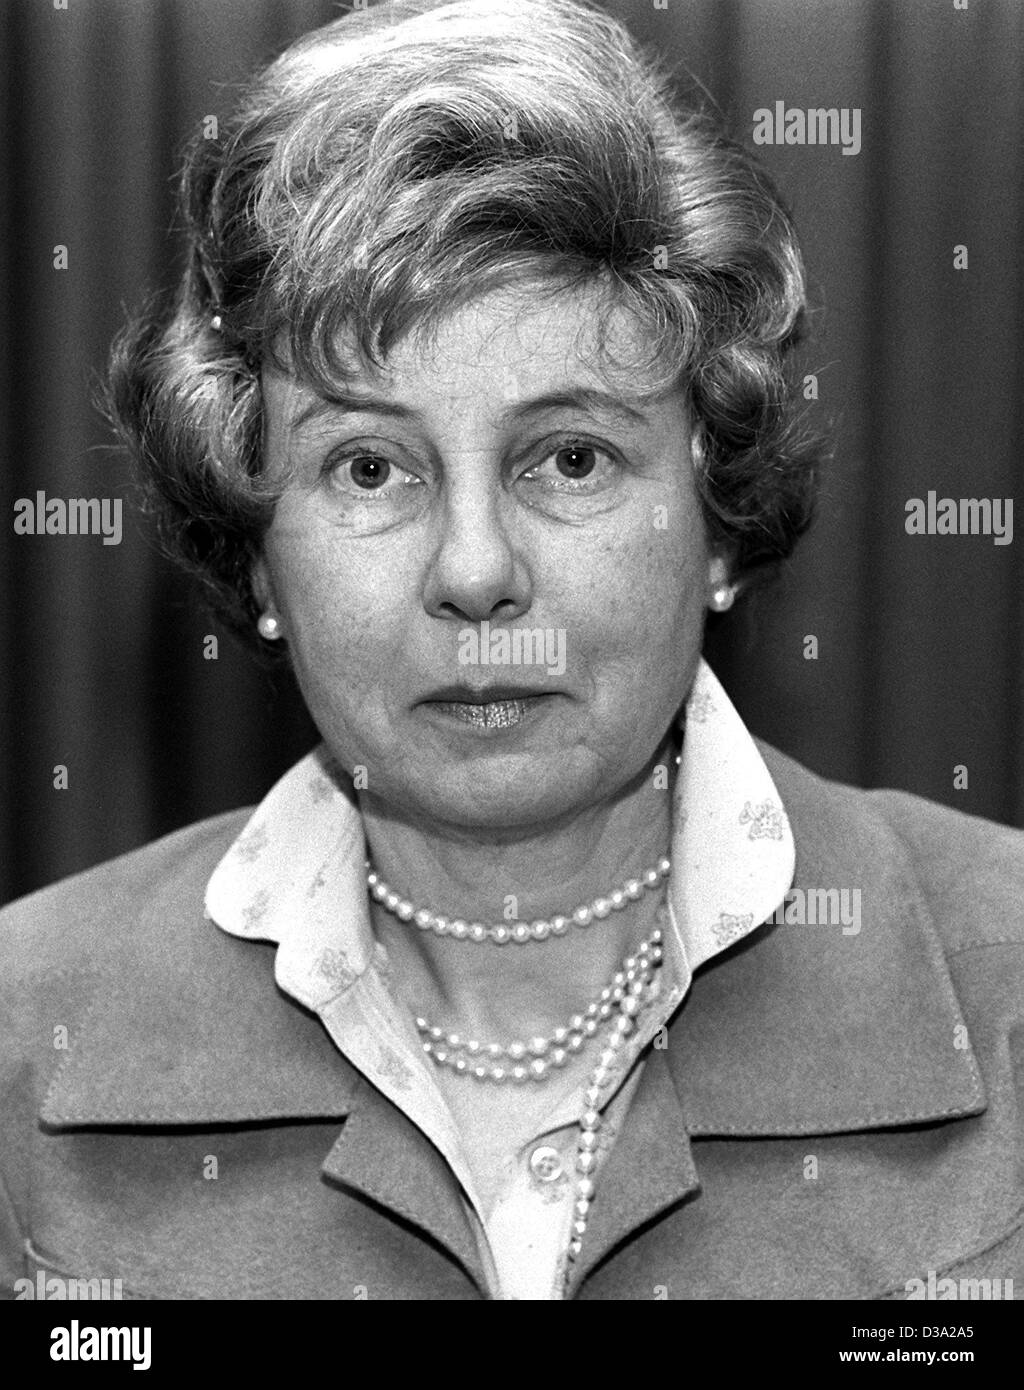 (dpa files) - Uta Ranke-Heinemann, the first female professor of catholic theology in Germany and daughter of the former President Gustav Heinemann, pictured 24 April 1985. In 1987, her professorship was withdrawn by Bishop Franz Hengsbach after a dispute concerning her statement in a TV talk show o Stock Photo